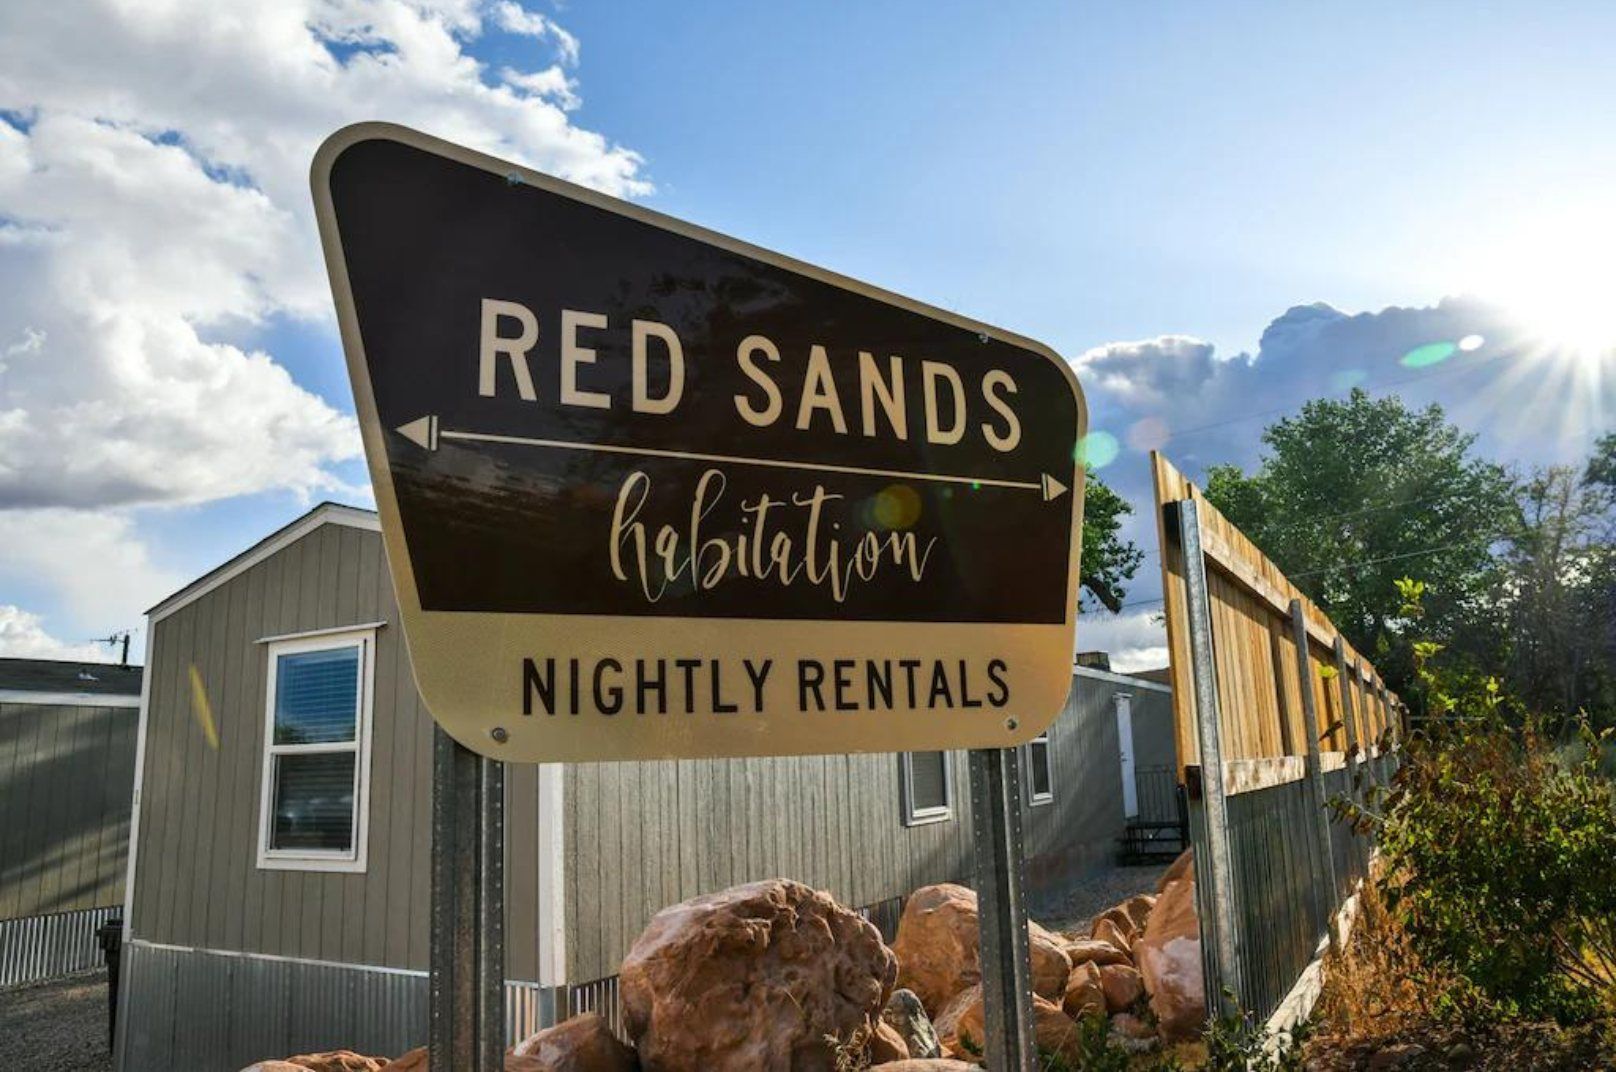 Airbnbs near Canyonlands National Park